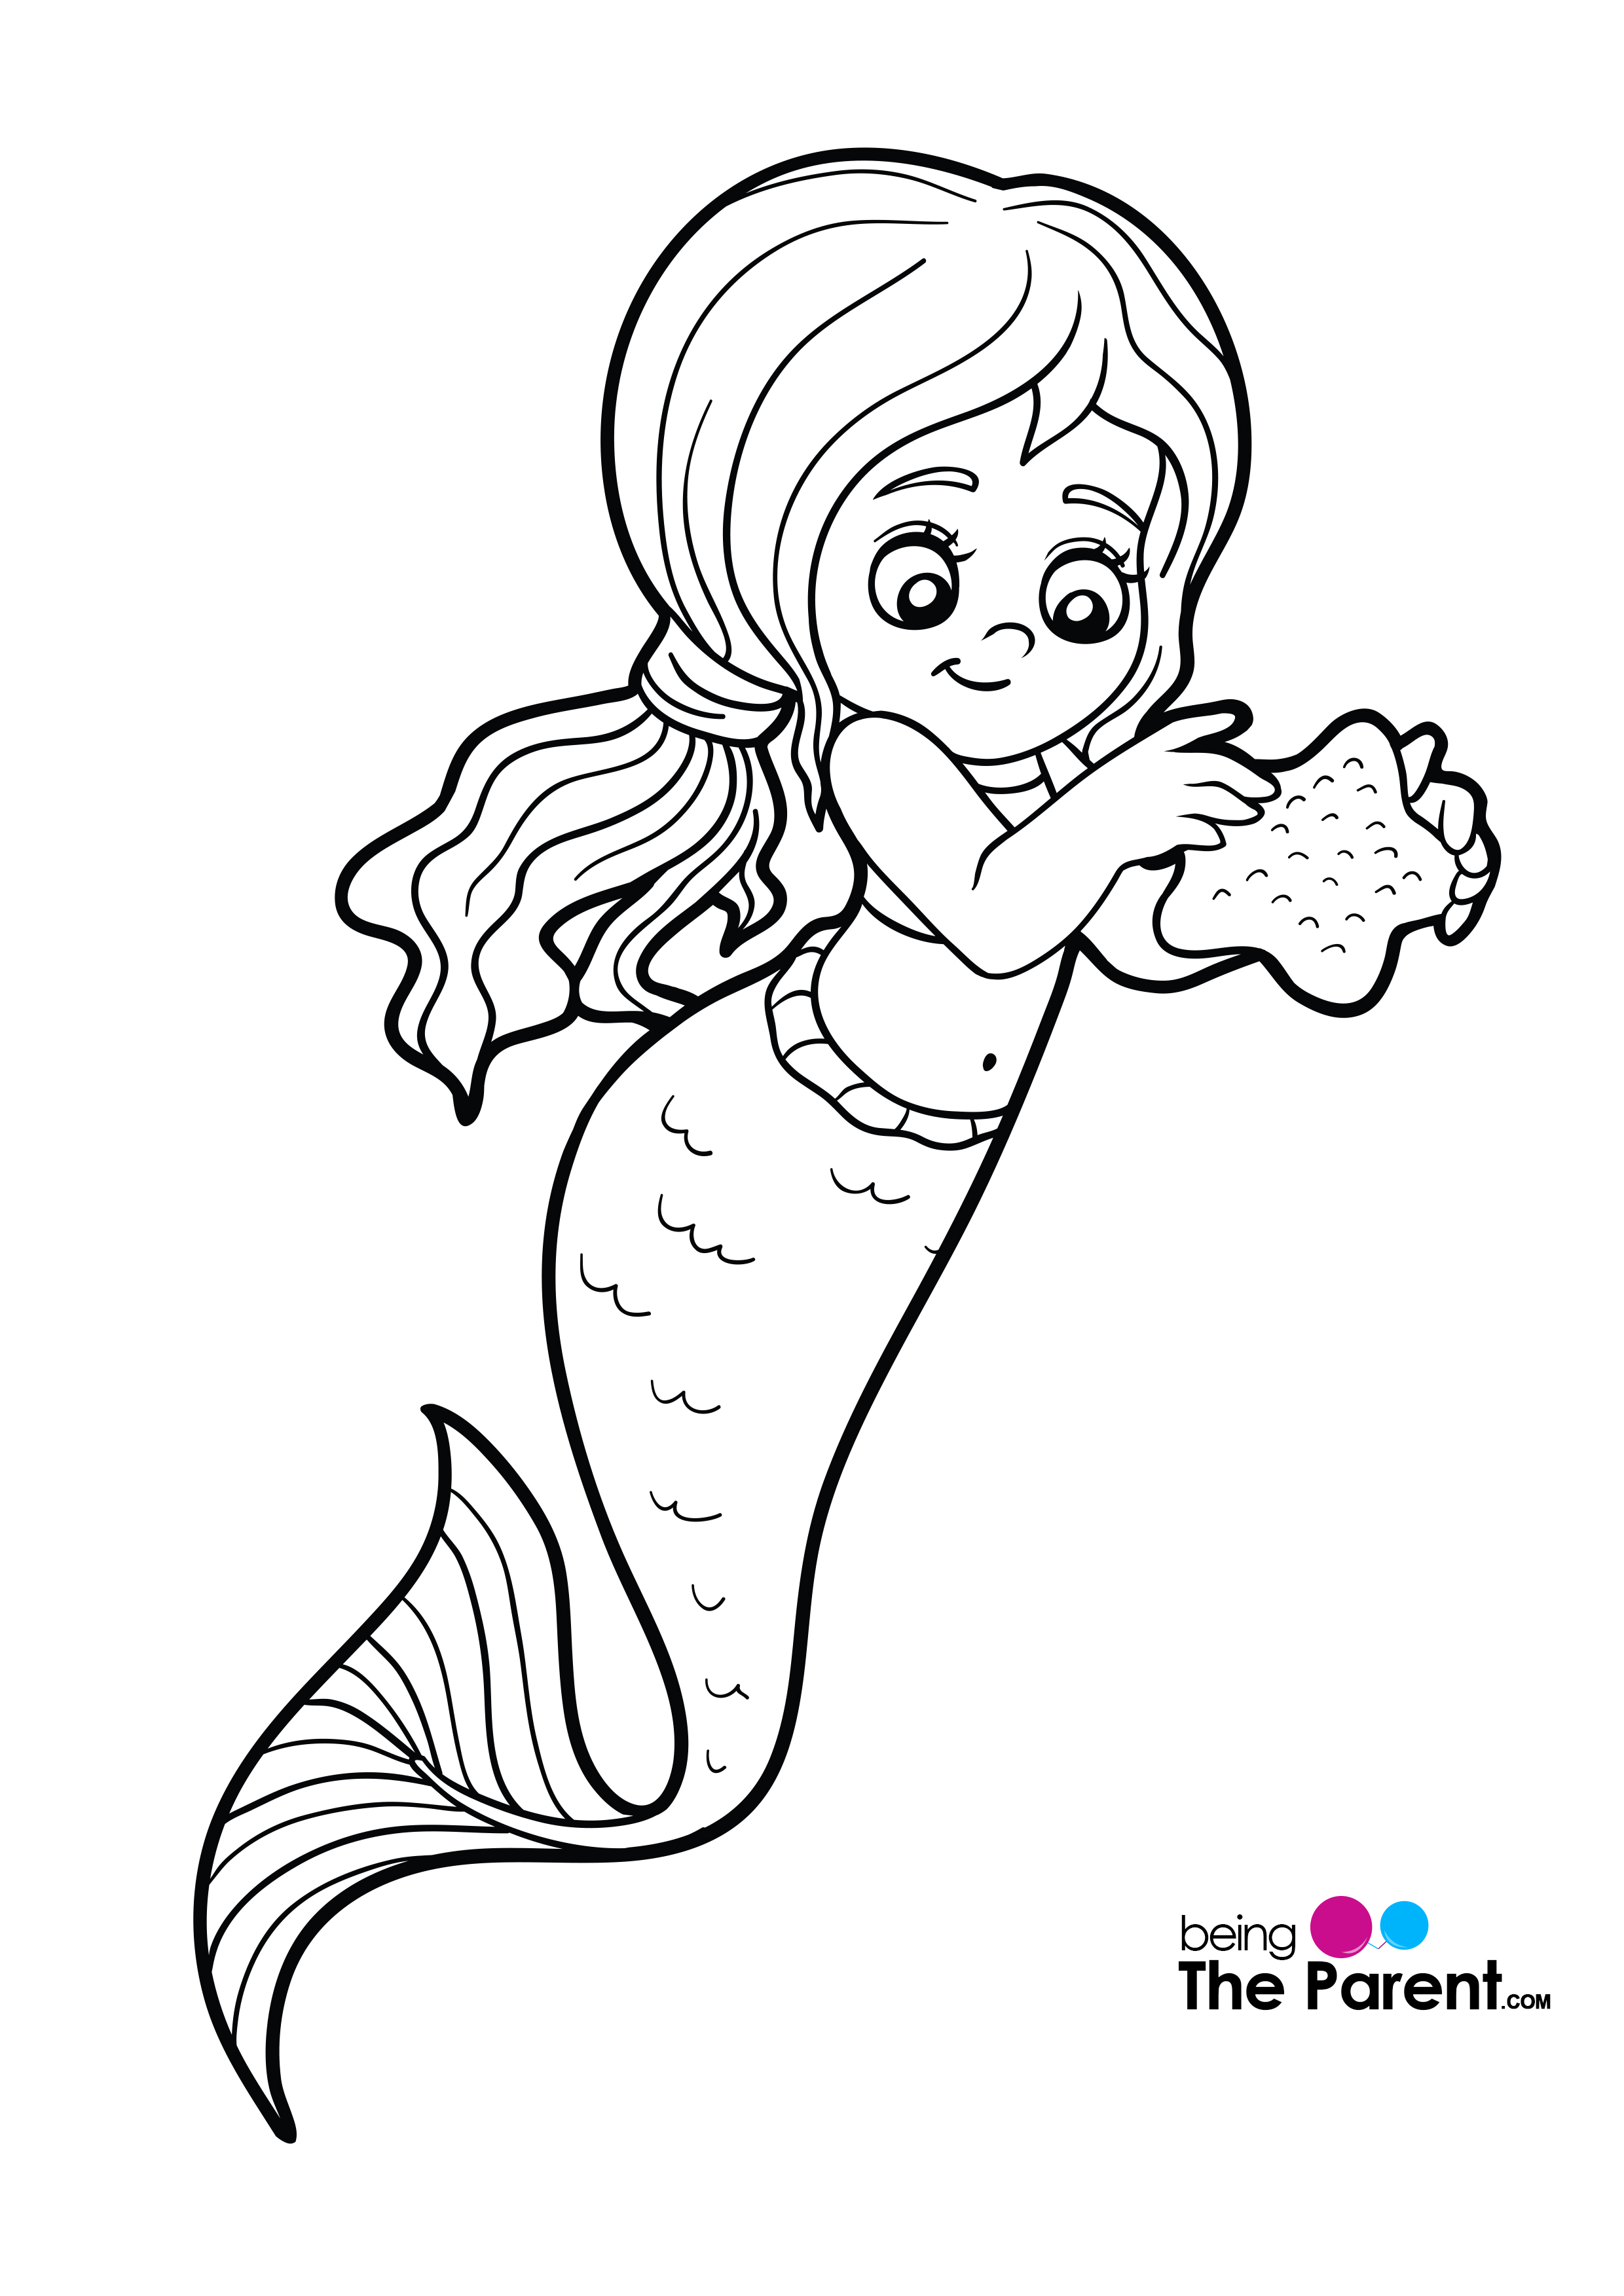 Search results for Mermaid coloring pages on Free